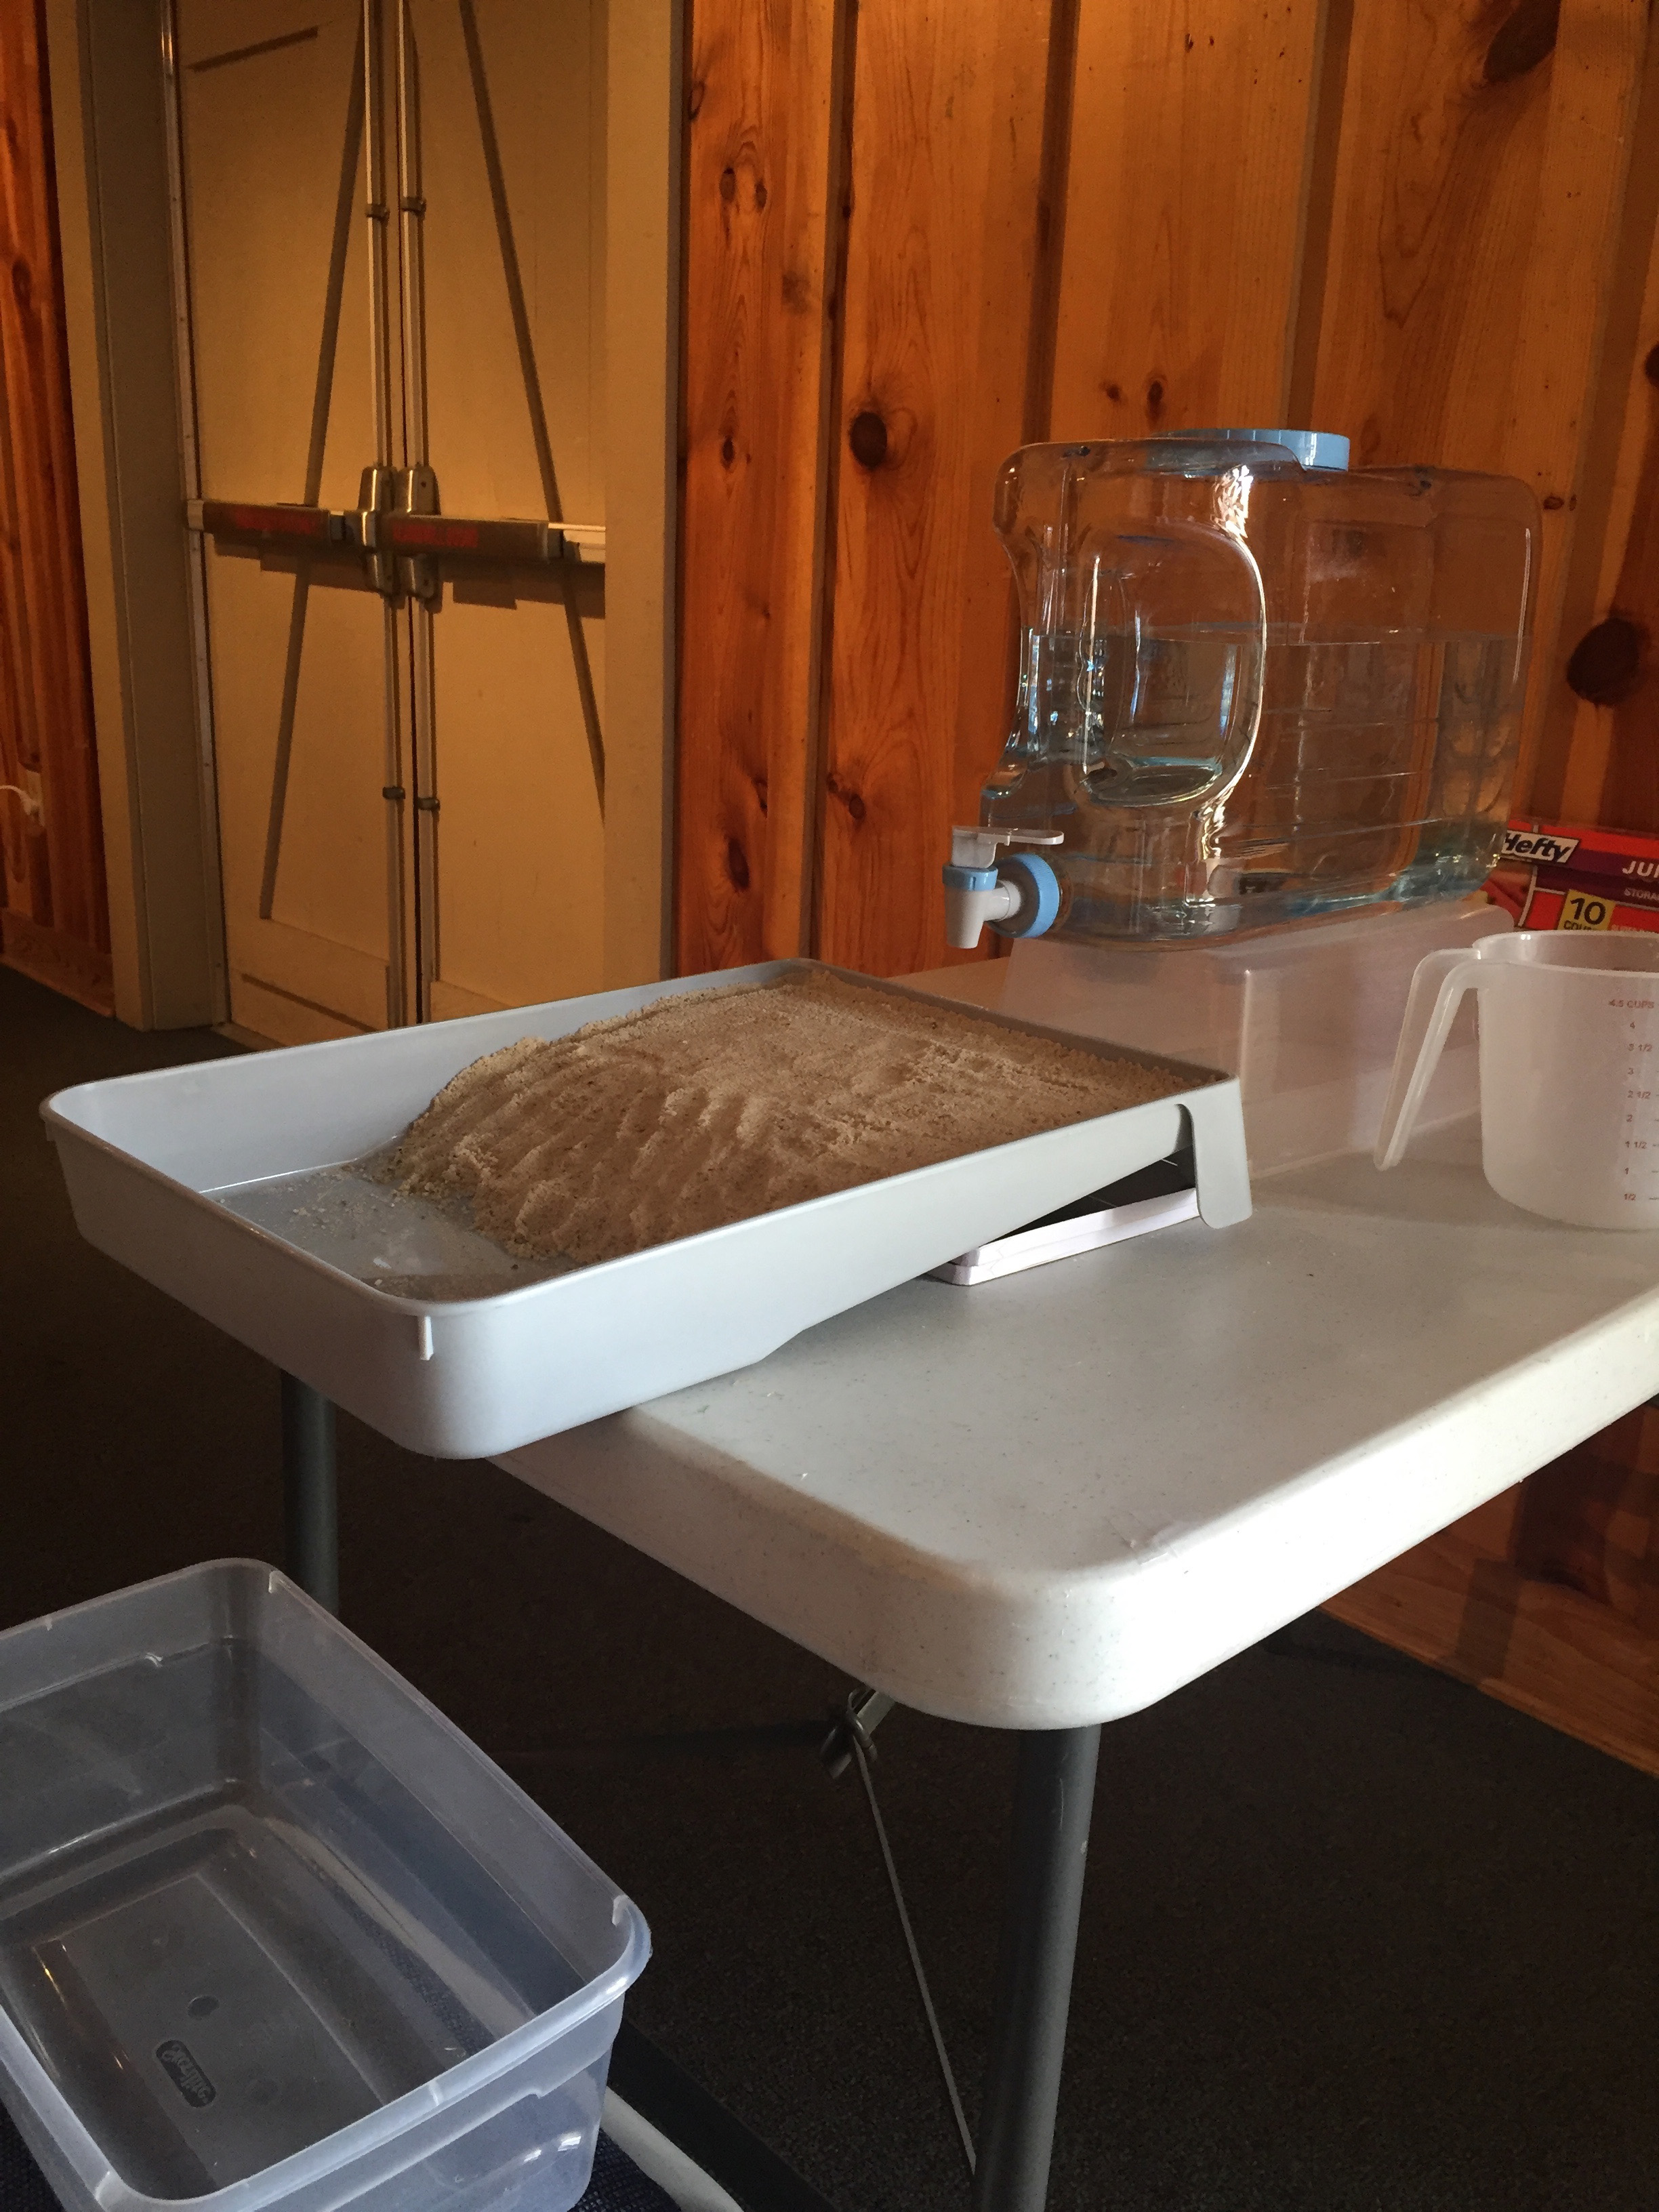 A photo of the stream table set-up, showing the water jug positioned over one end of the stream table tray, and a bin to catch drainage water at the bottom.